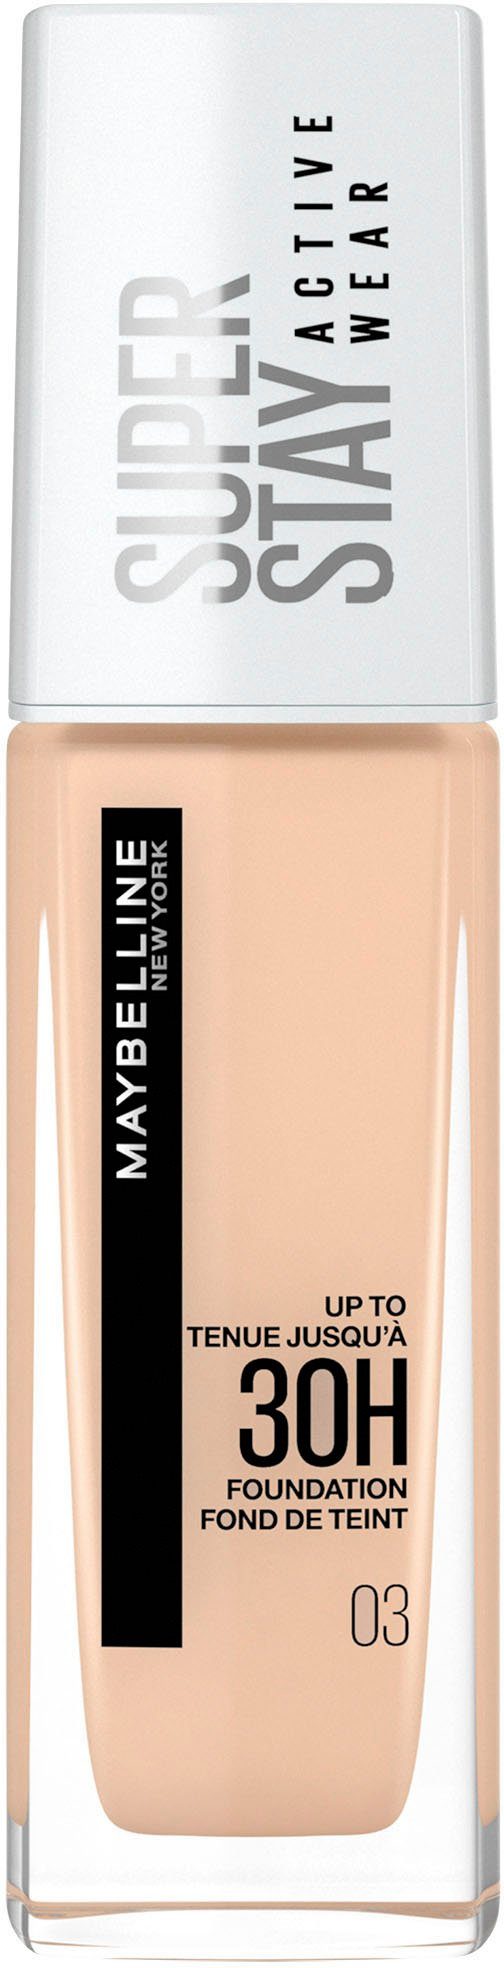 MAYBELLINE NEW 3 Foundation Stay Wear True Super Active Ivory YORK